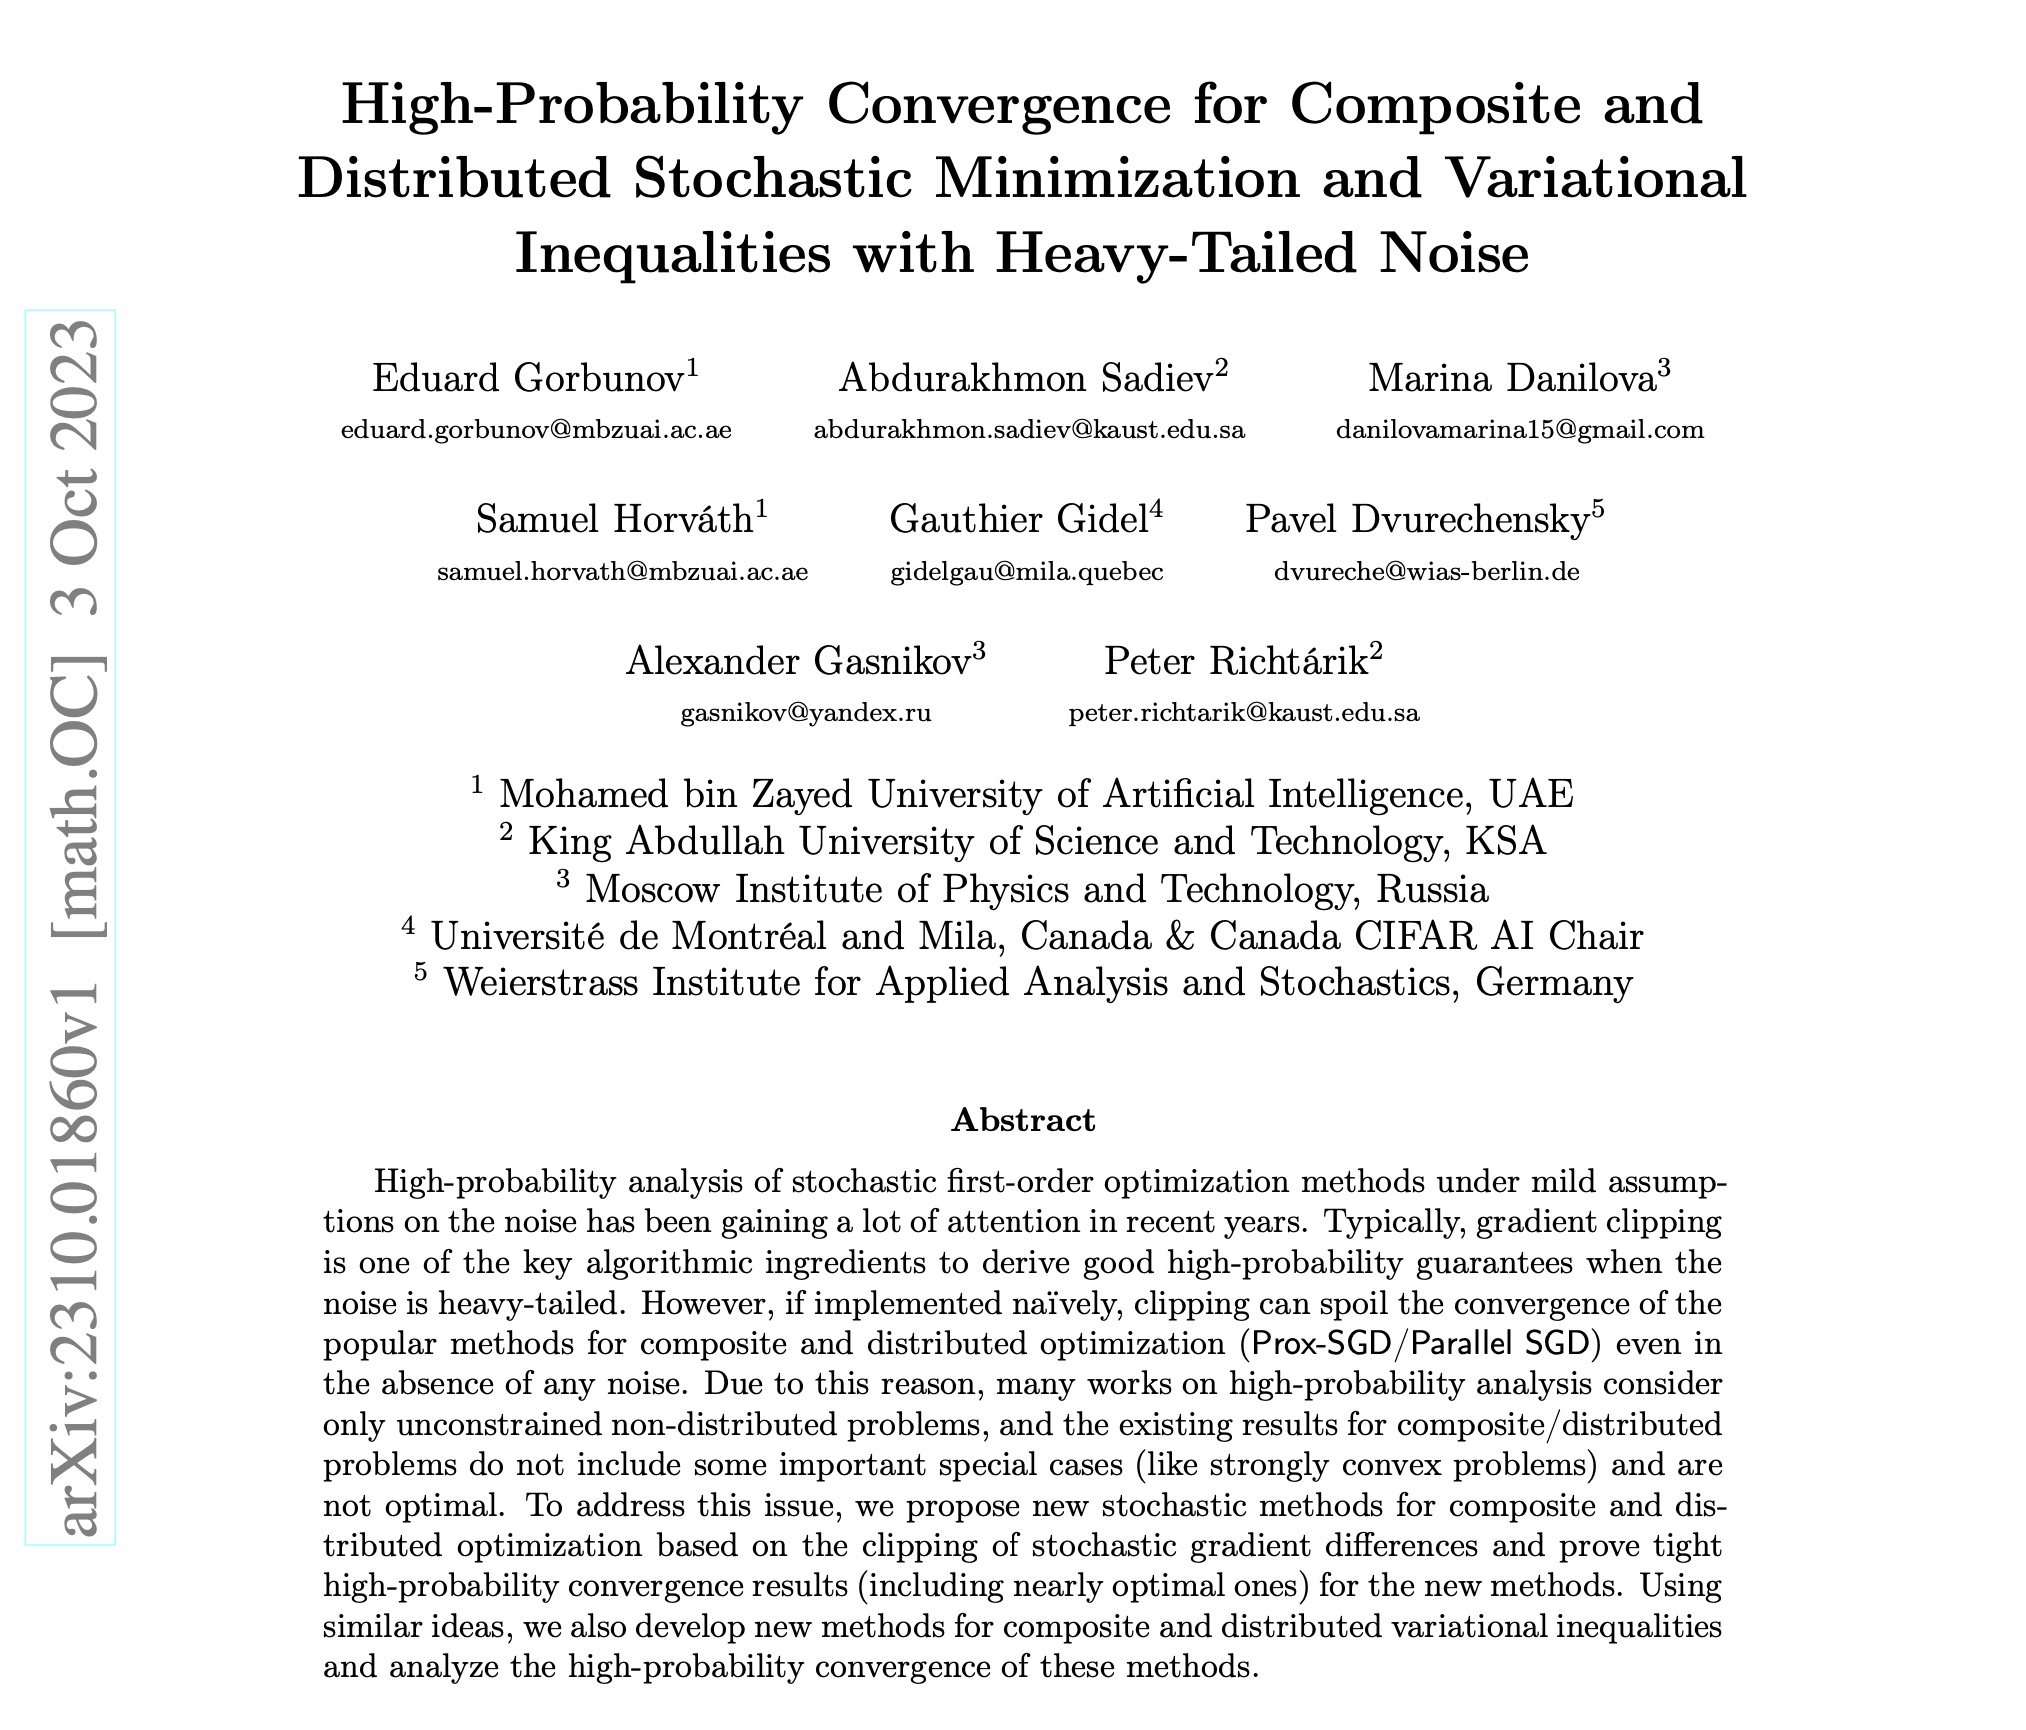 High-Probability Convergence for Composite and Distributed Stochastic Minimization and Variational Inequalities with Heavy-Tailed Noise